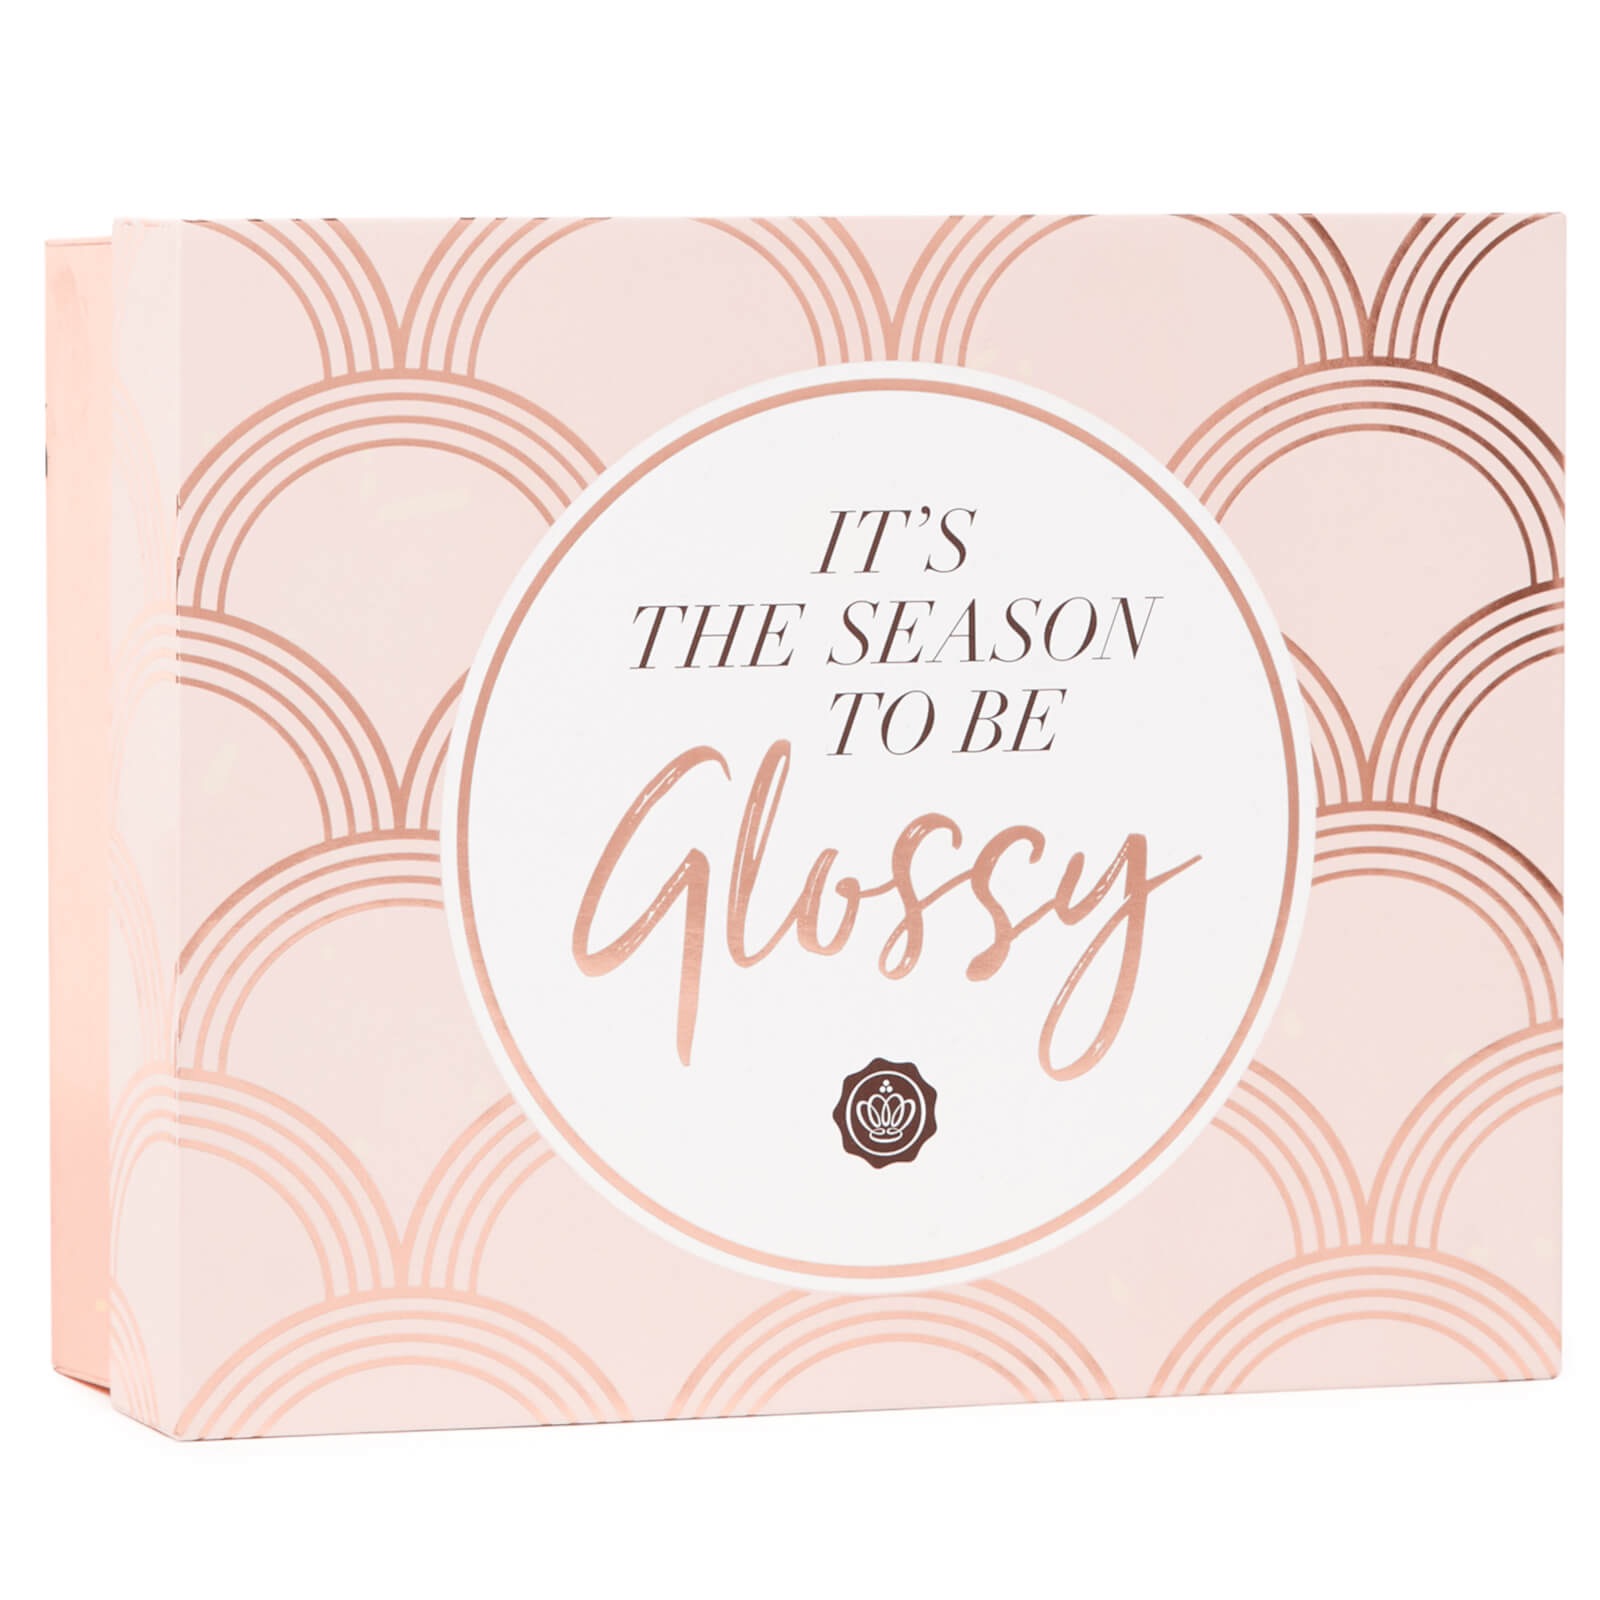 'It's The Season To Be Glossy' Holiday Limited Edition 2019 | GLOSSYBOX US - 節日禮盒